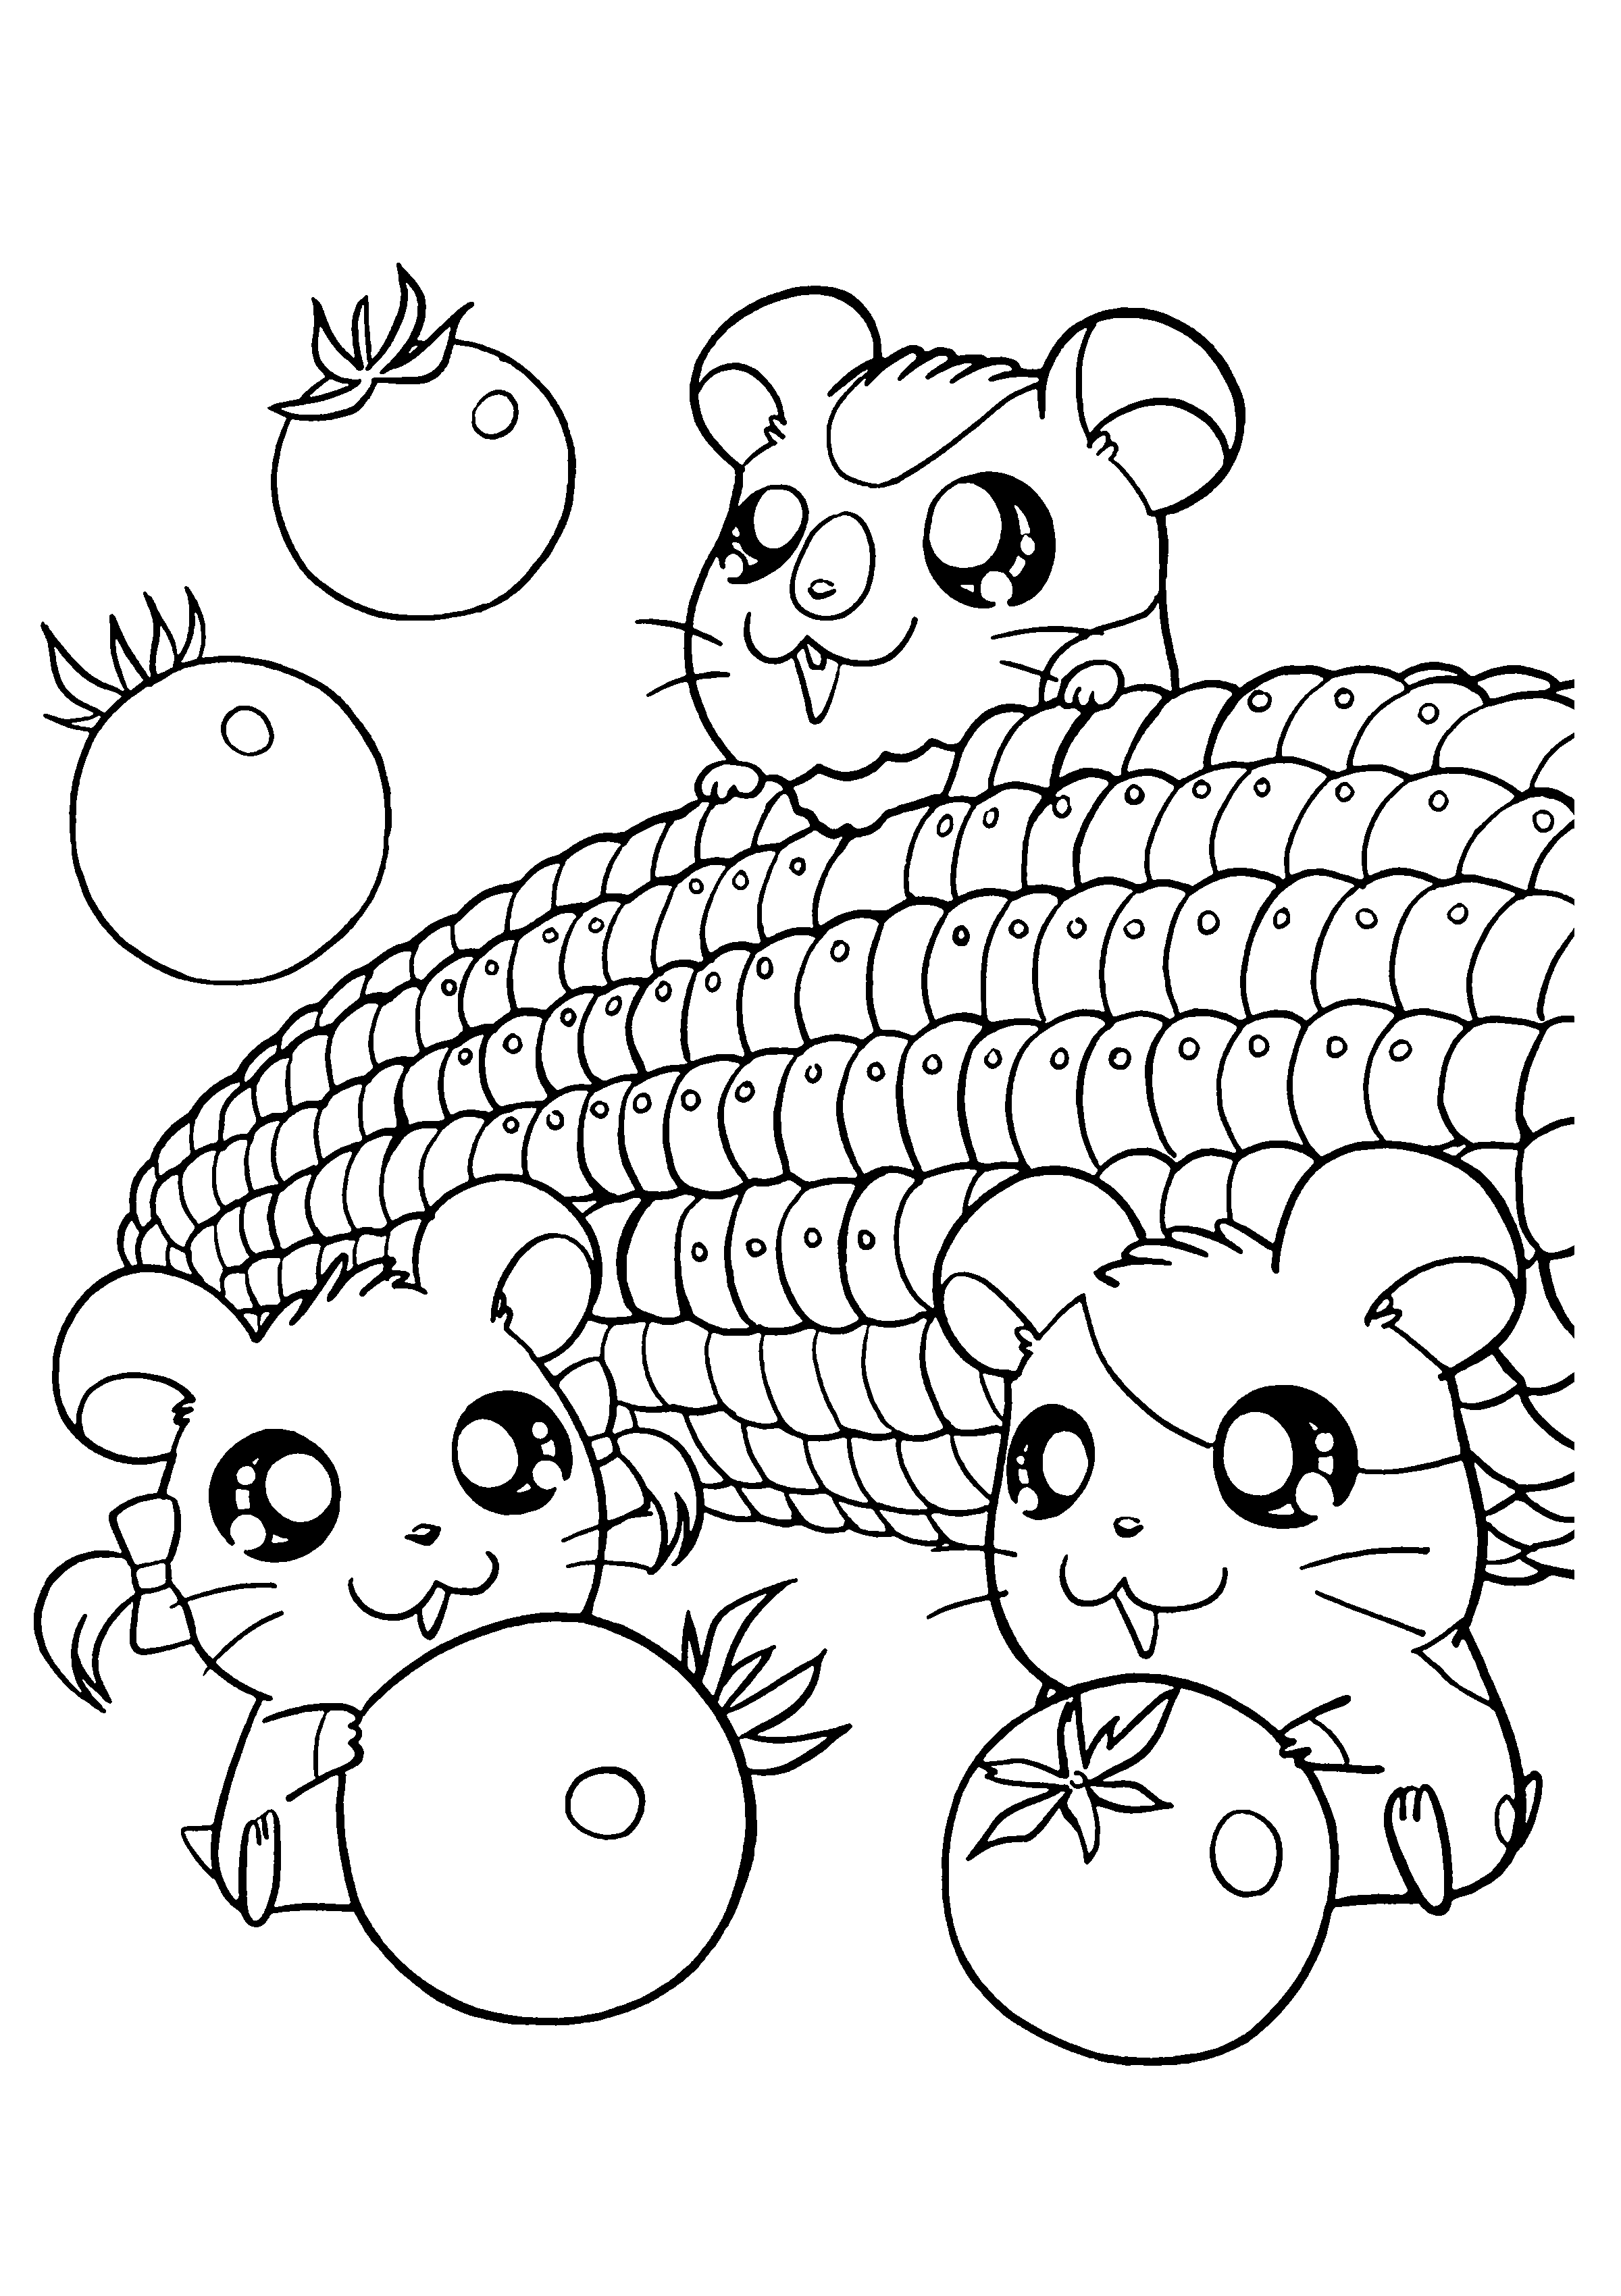 kawaii colouring pages kawaii coloring pages to download and print for free pages kawaii colouring 